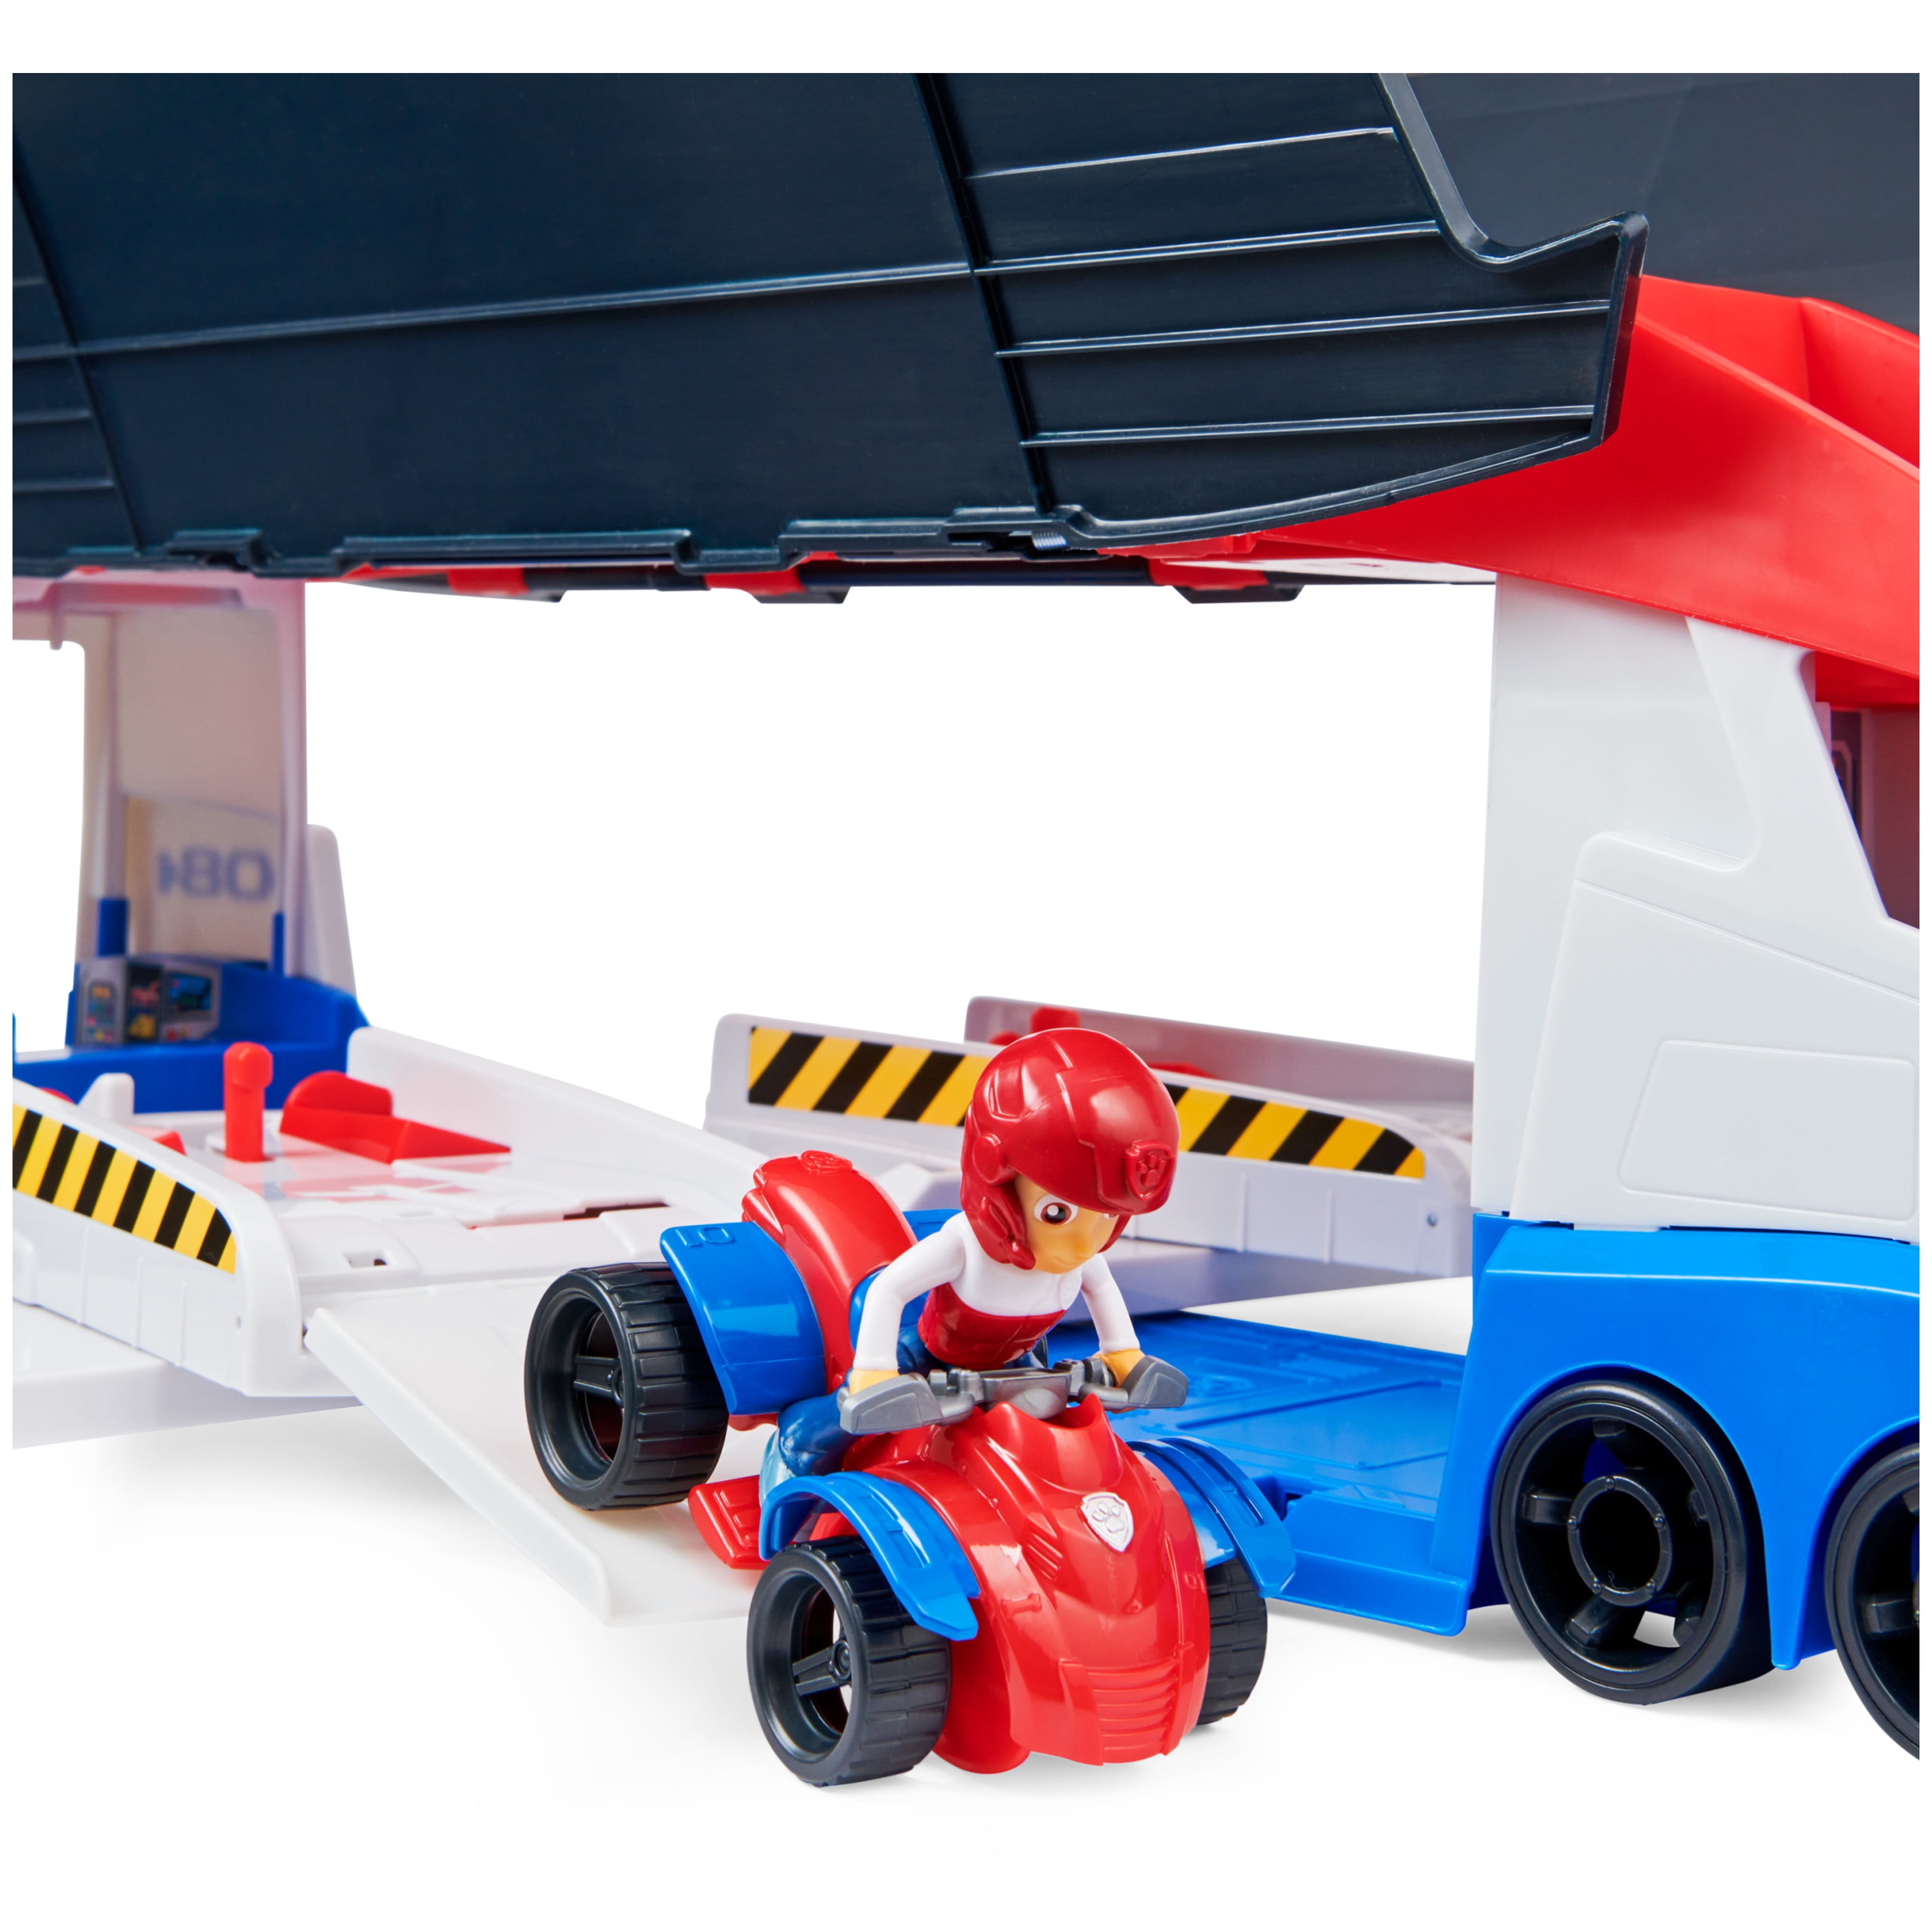 PAW Patrol, PAW Patroller with Dual Vehicle Launchers, Figure and ATV - 3